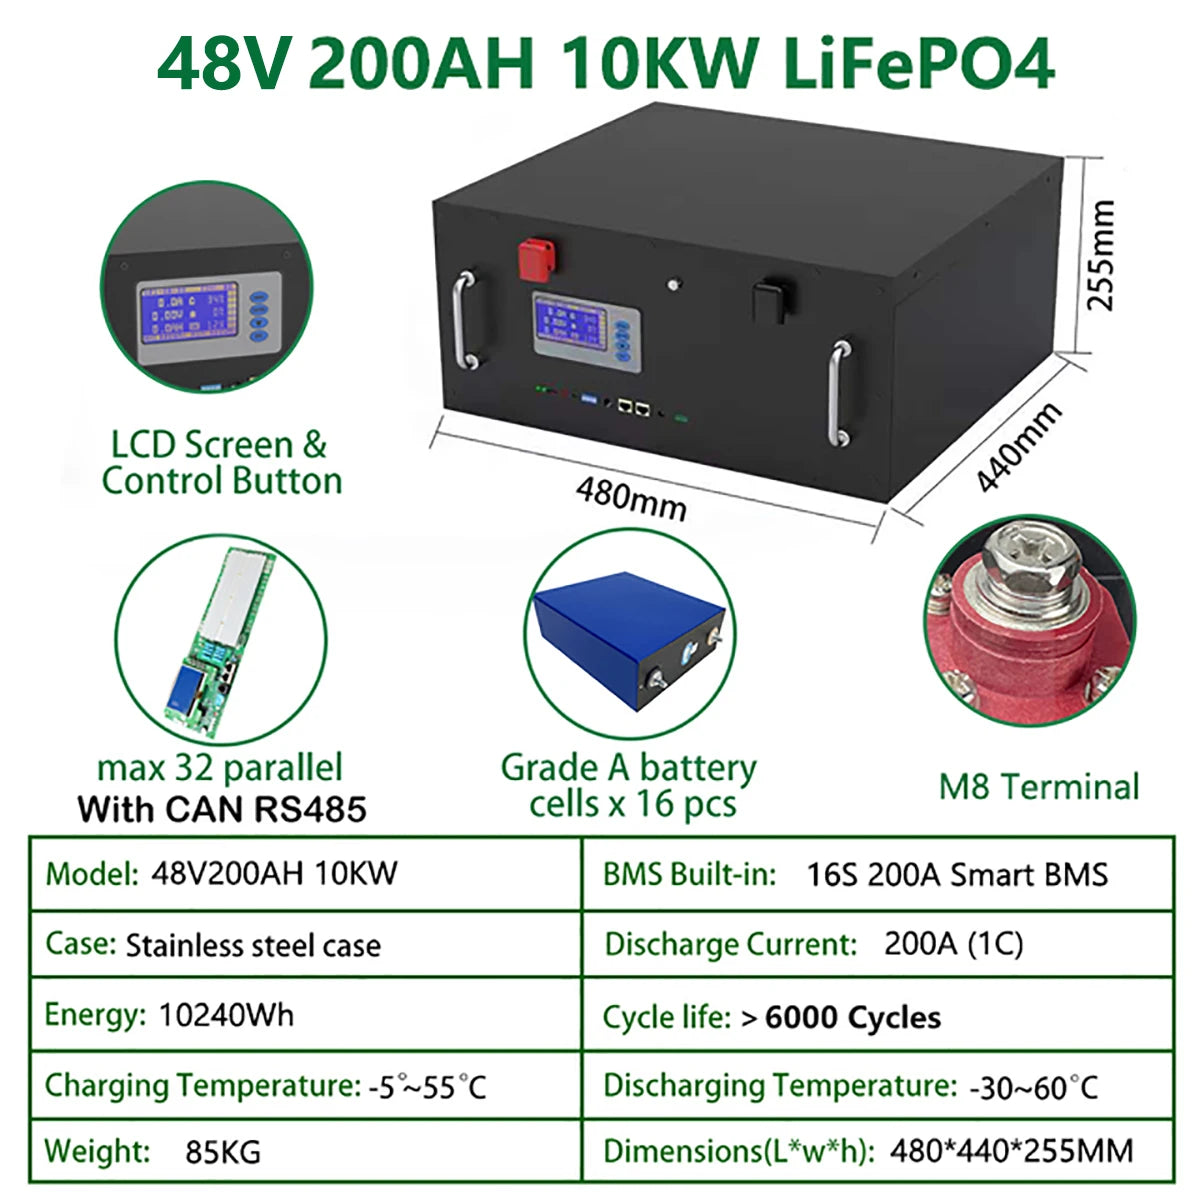 48V 100AH 200AH LiFePO4 Battery, RS485 CAN BUS PC